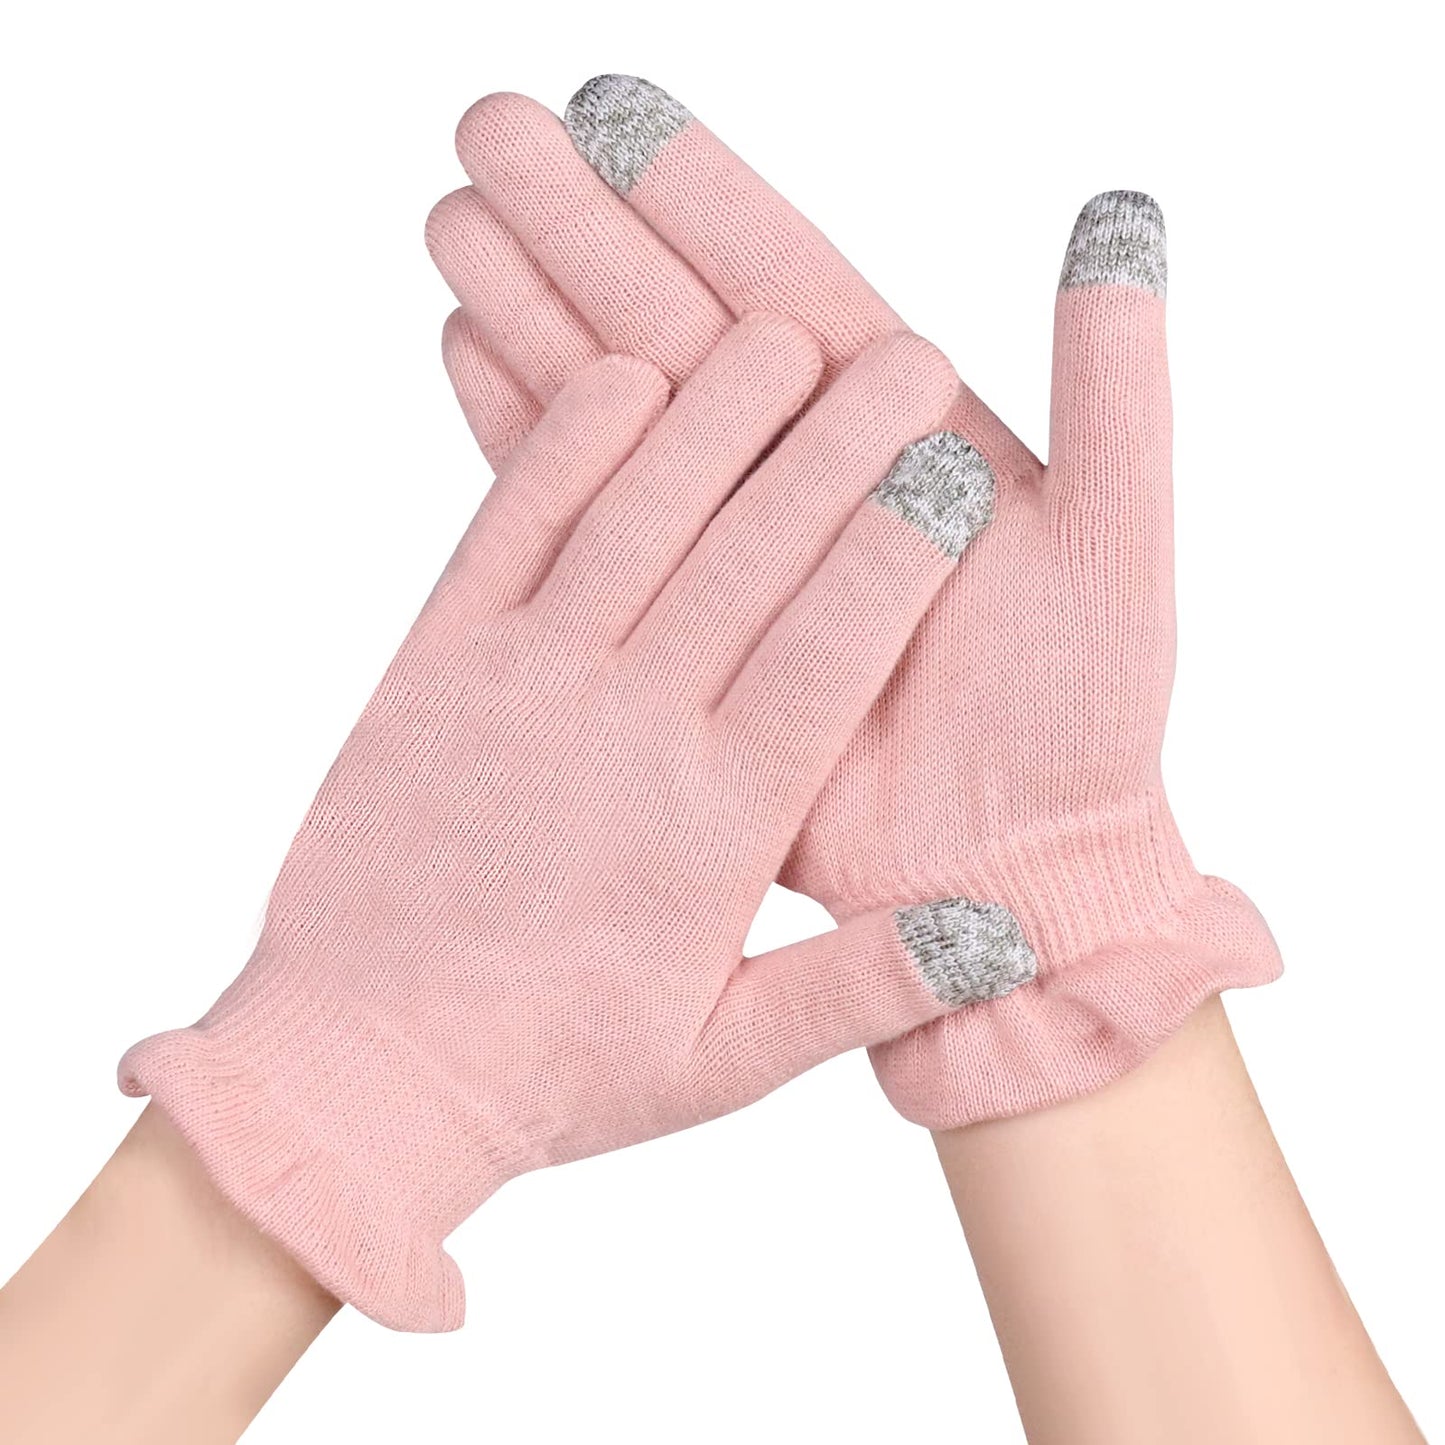 Donfri Cotton Moisturizing Gloves Overnight 2 Pairs Touchscreen Fingers for SPA Dry Hands Hand Care Day and Night Moisturizing (Medium-Pink)